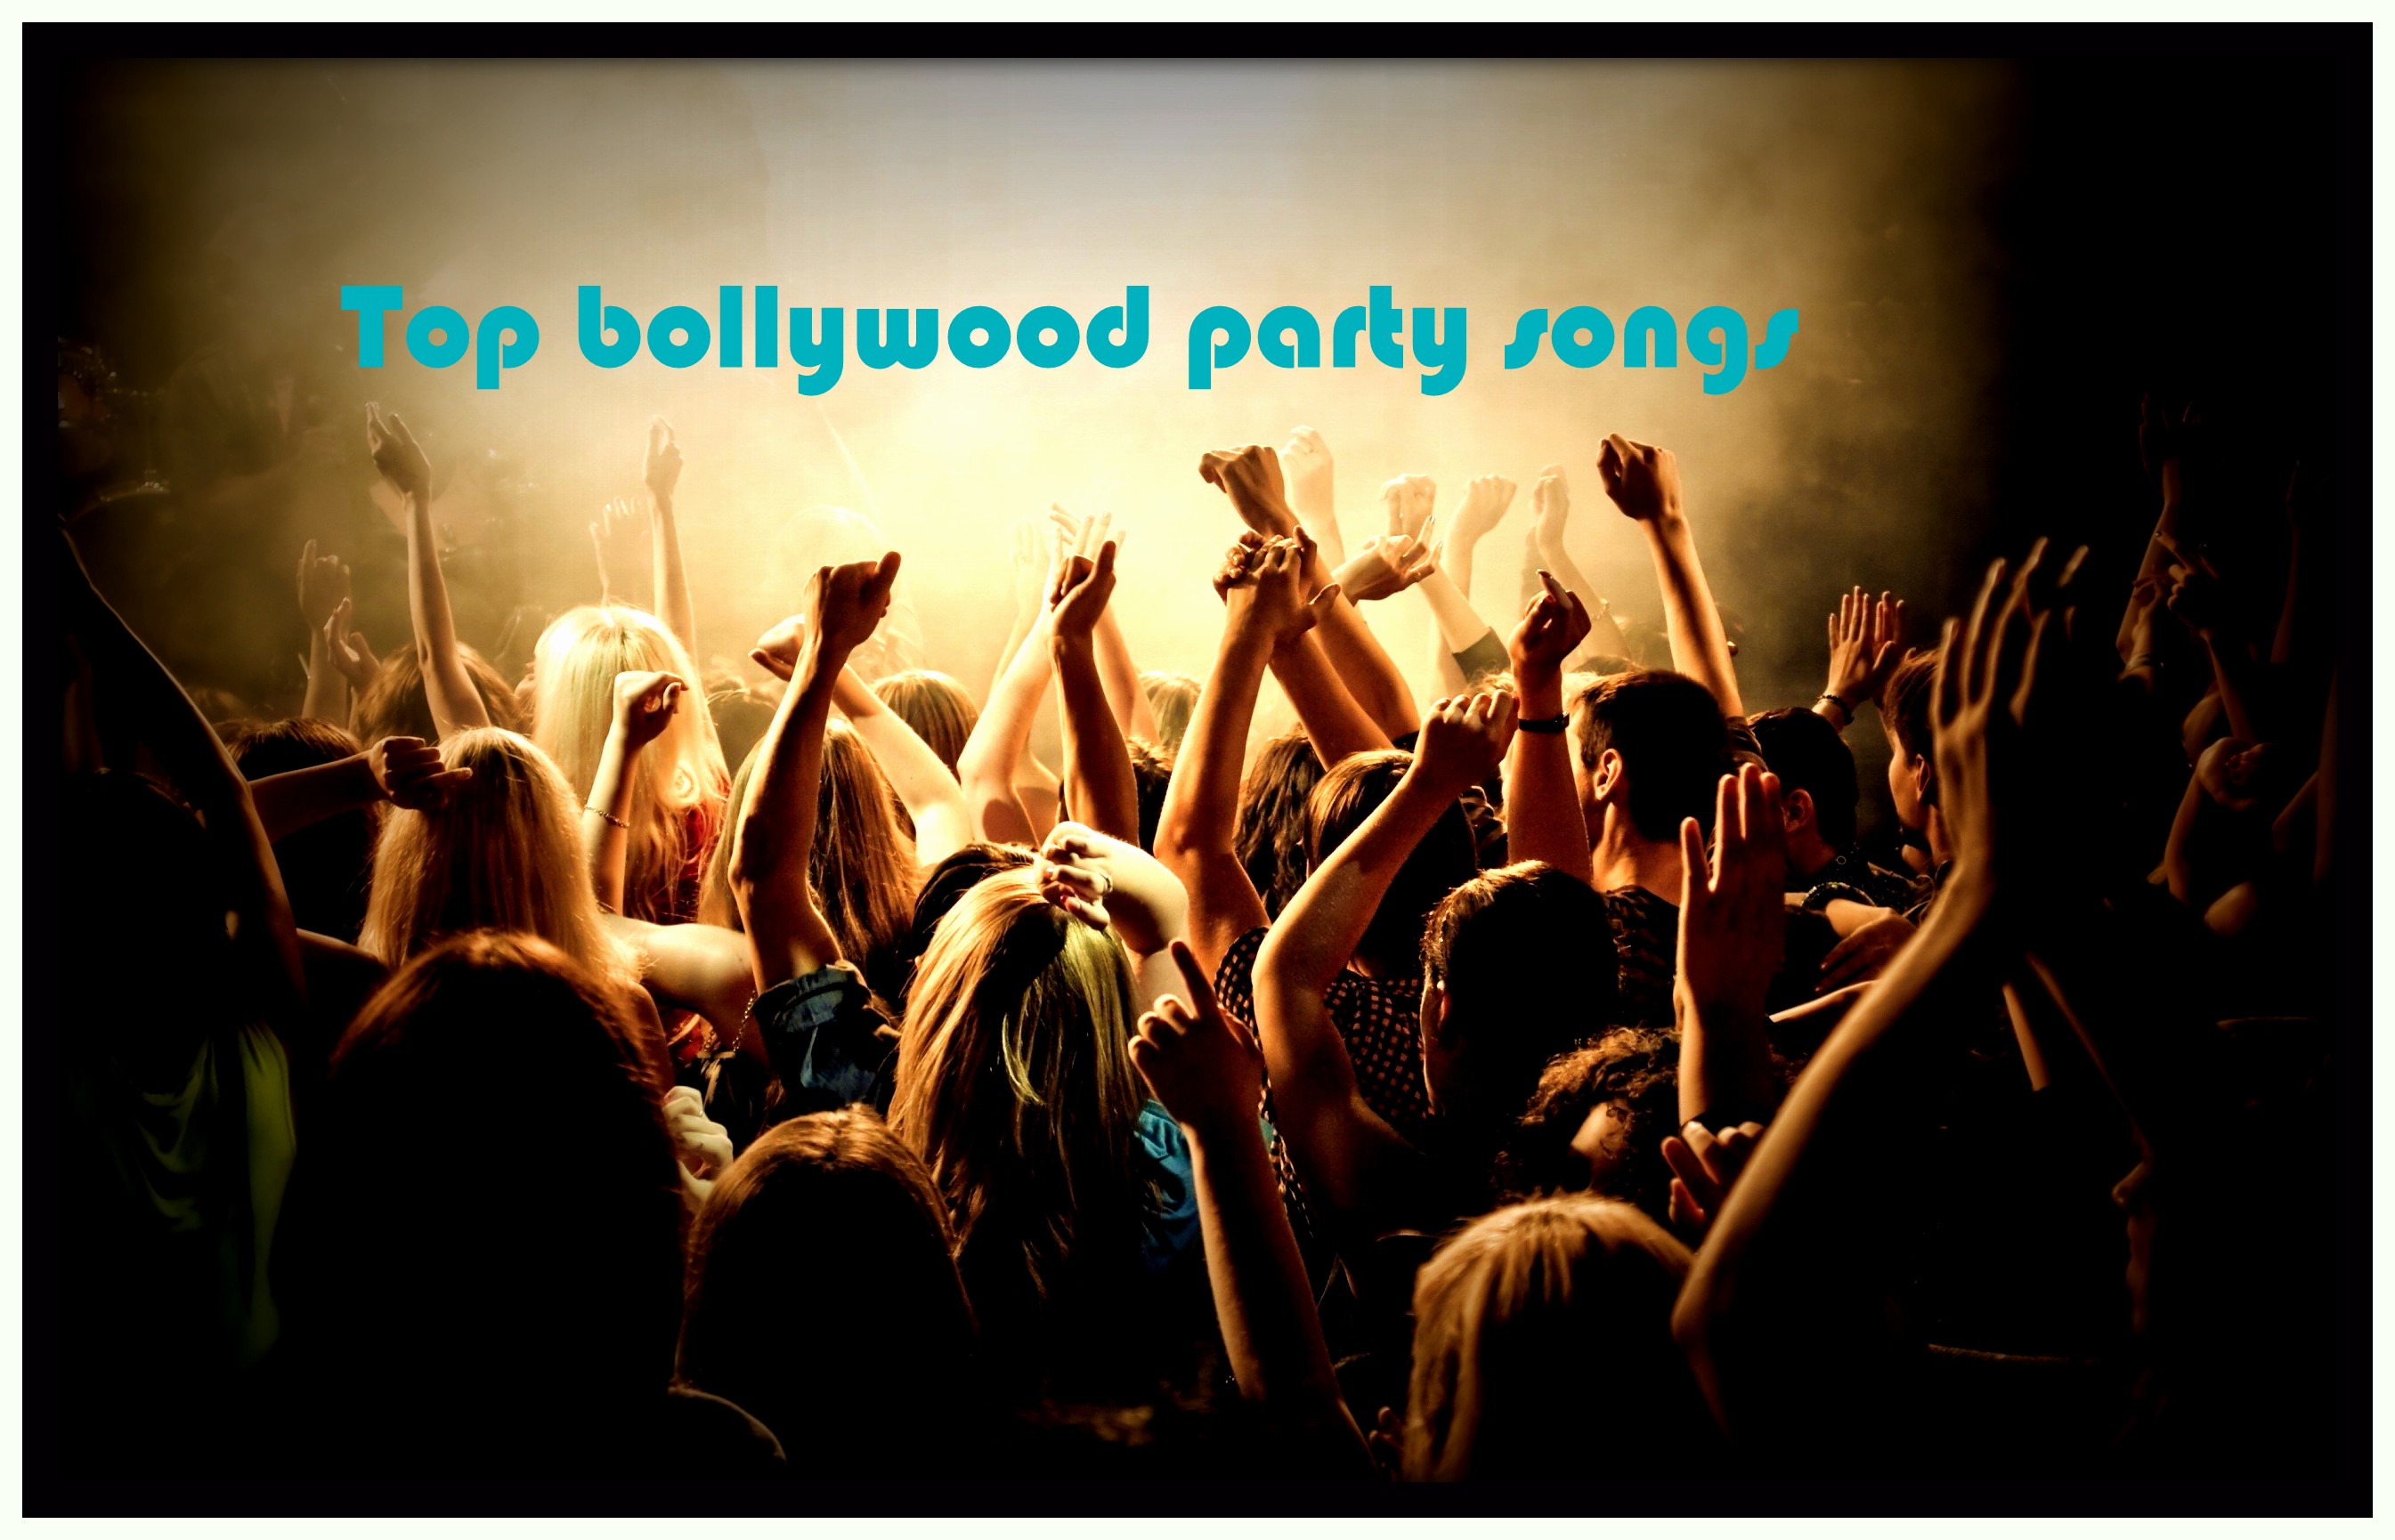 Top bollywood party songs